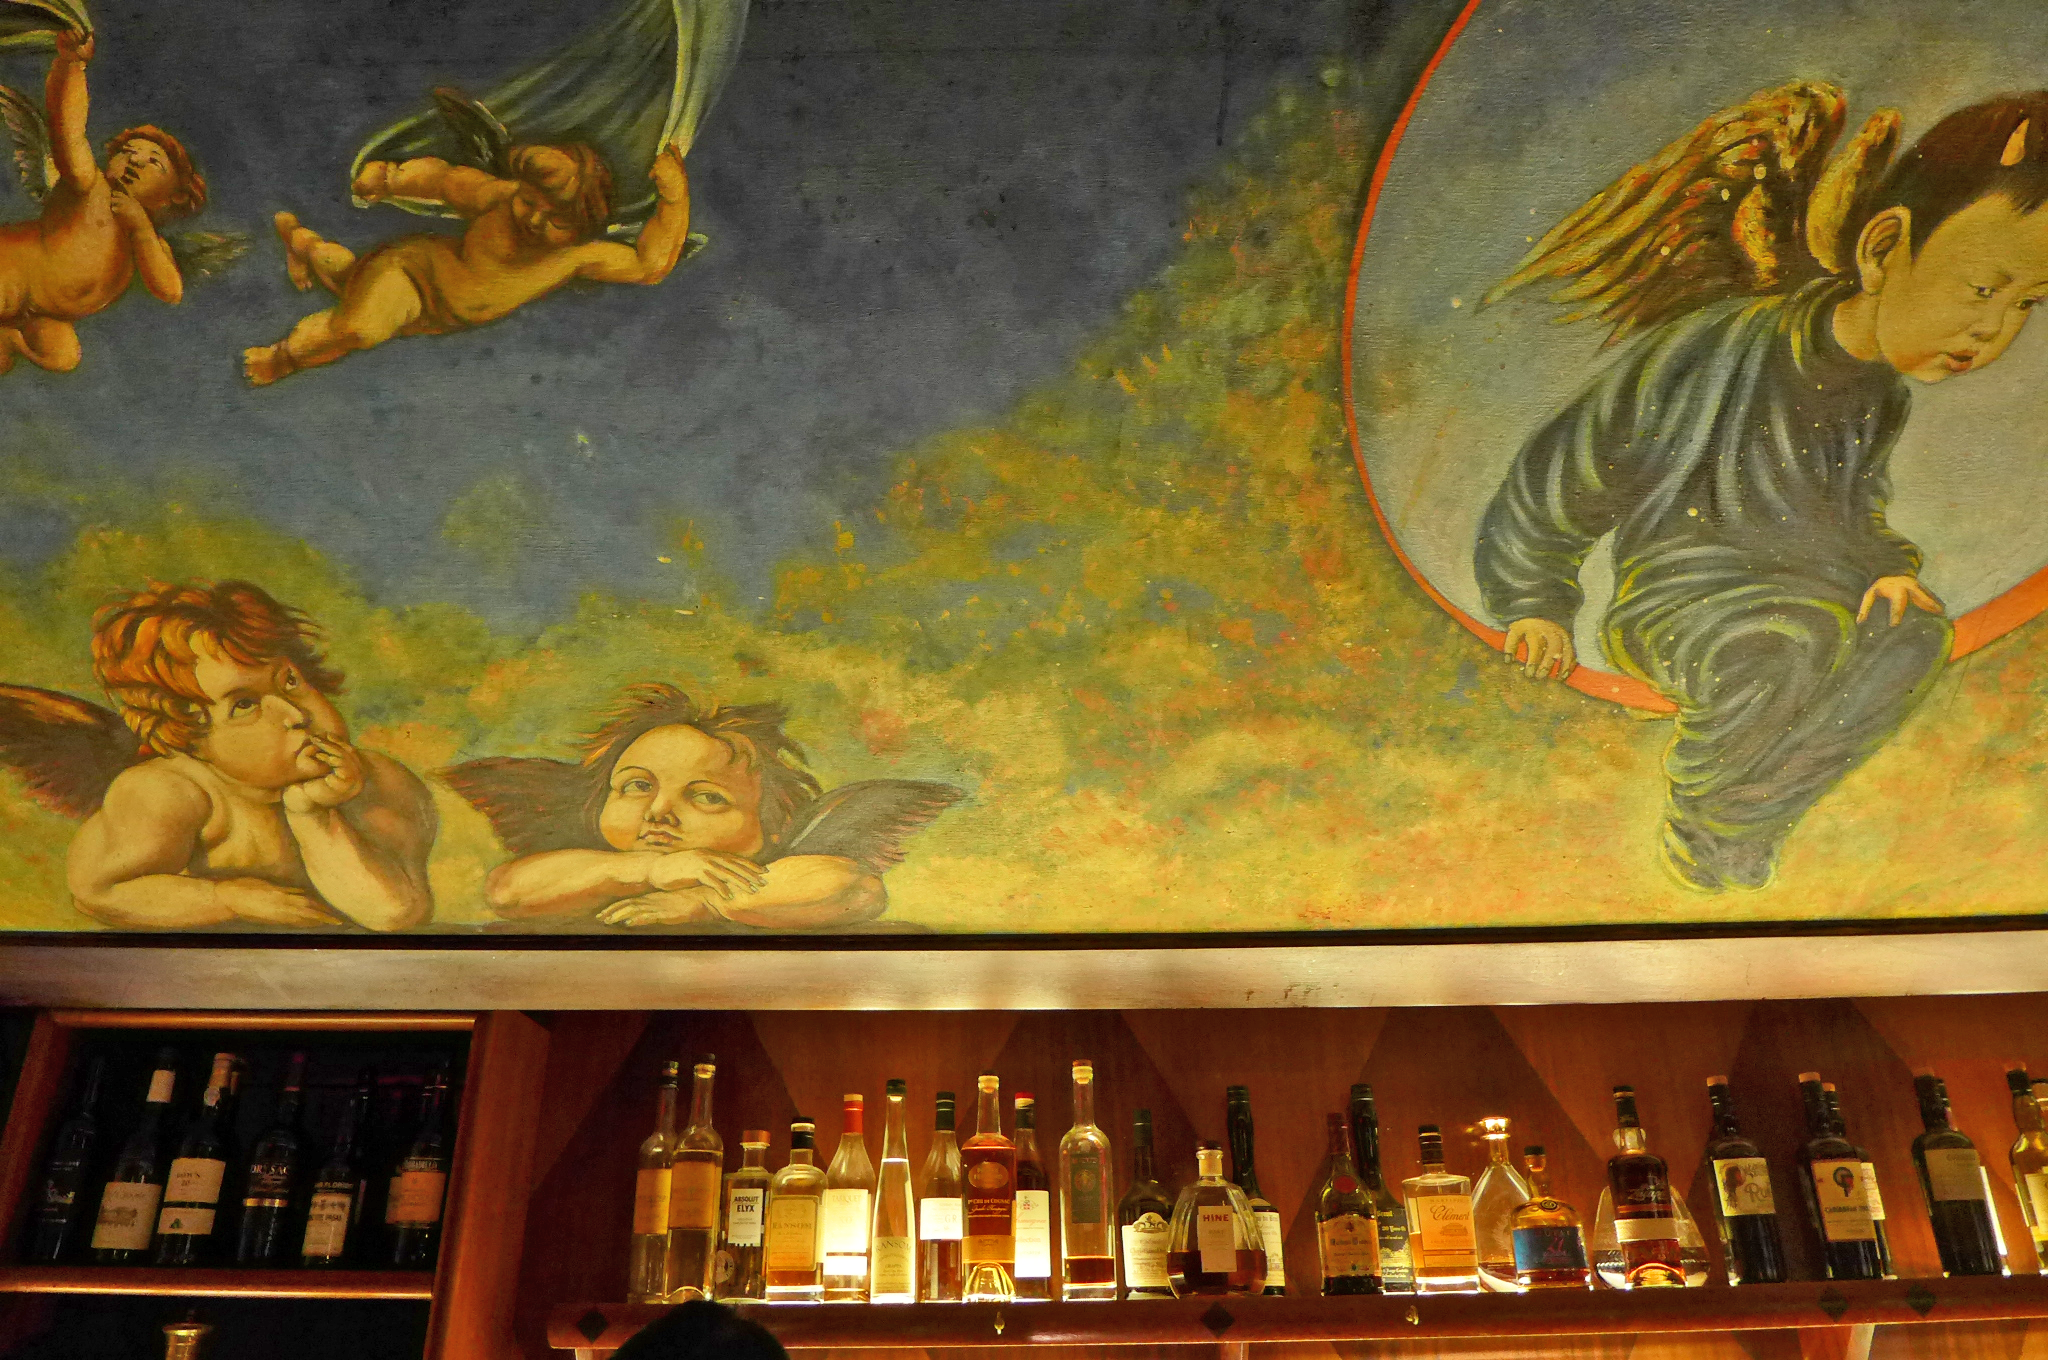 A huge, celestial painting with winged cherubs hangs above the bar at Angel’s Share.